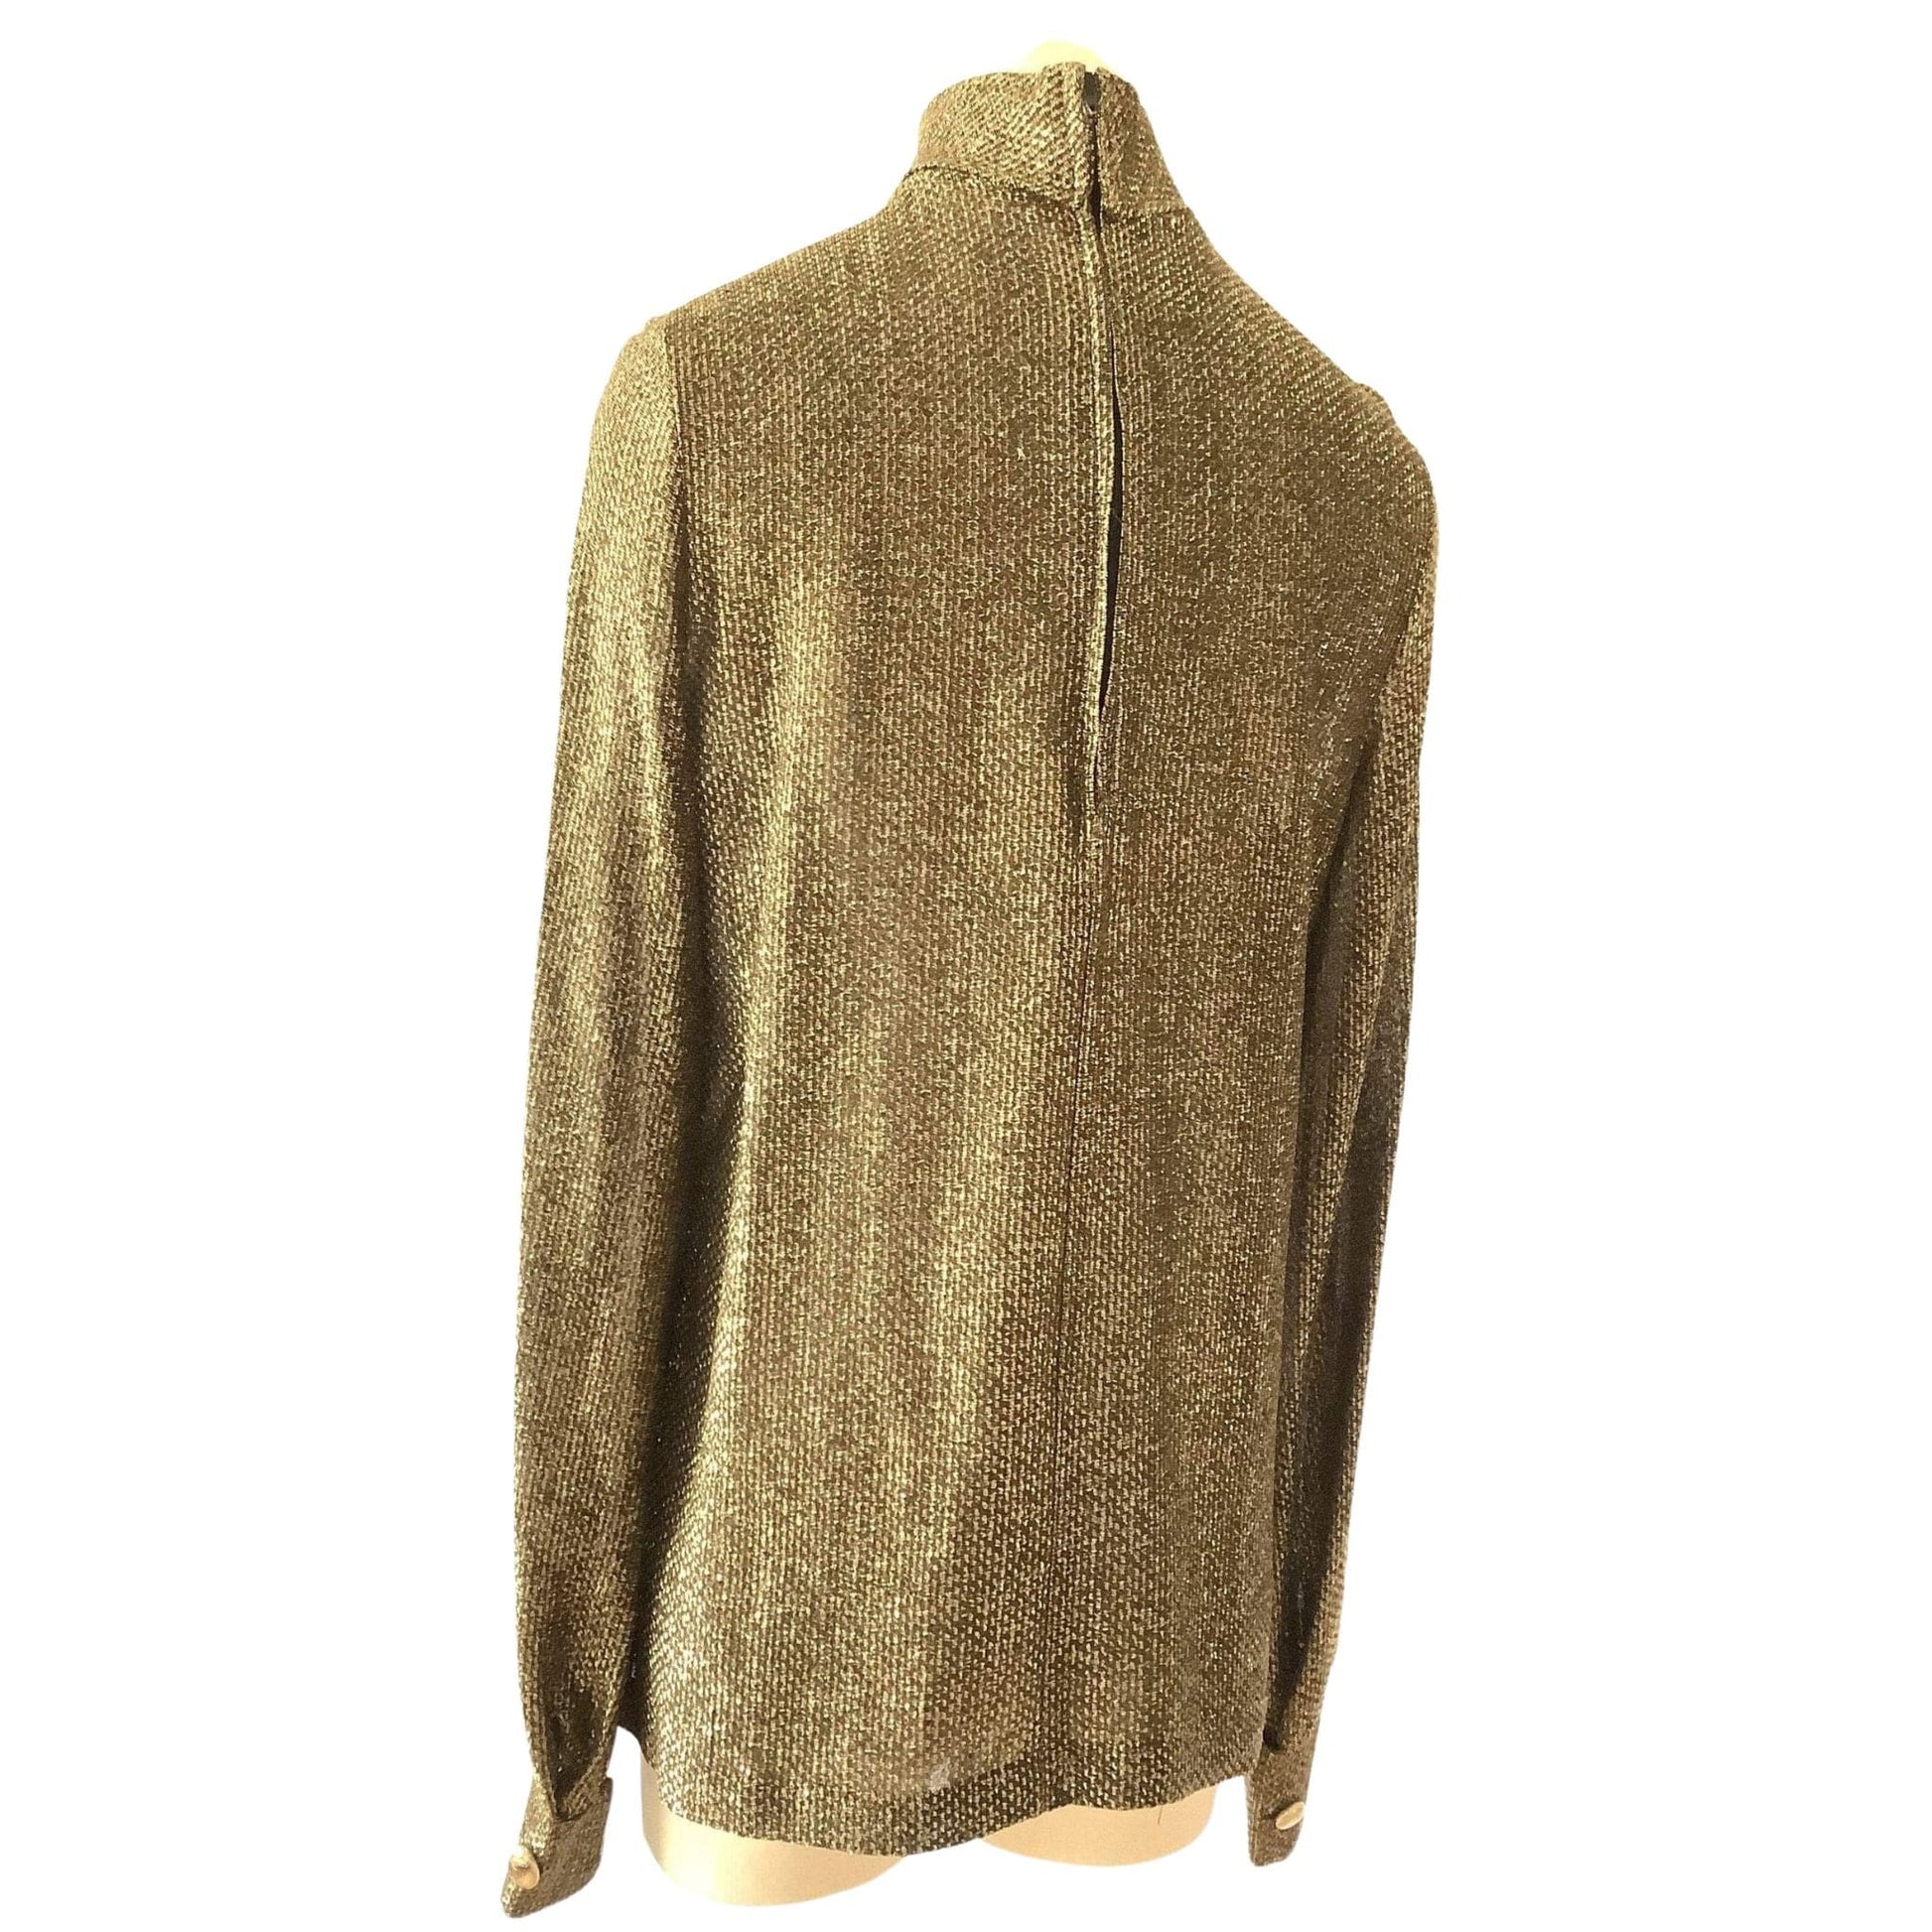 Vintage Metallic Gold Top Small / Gold / Vintage 1960s